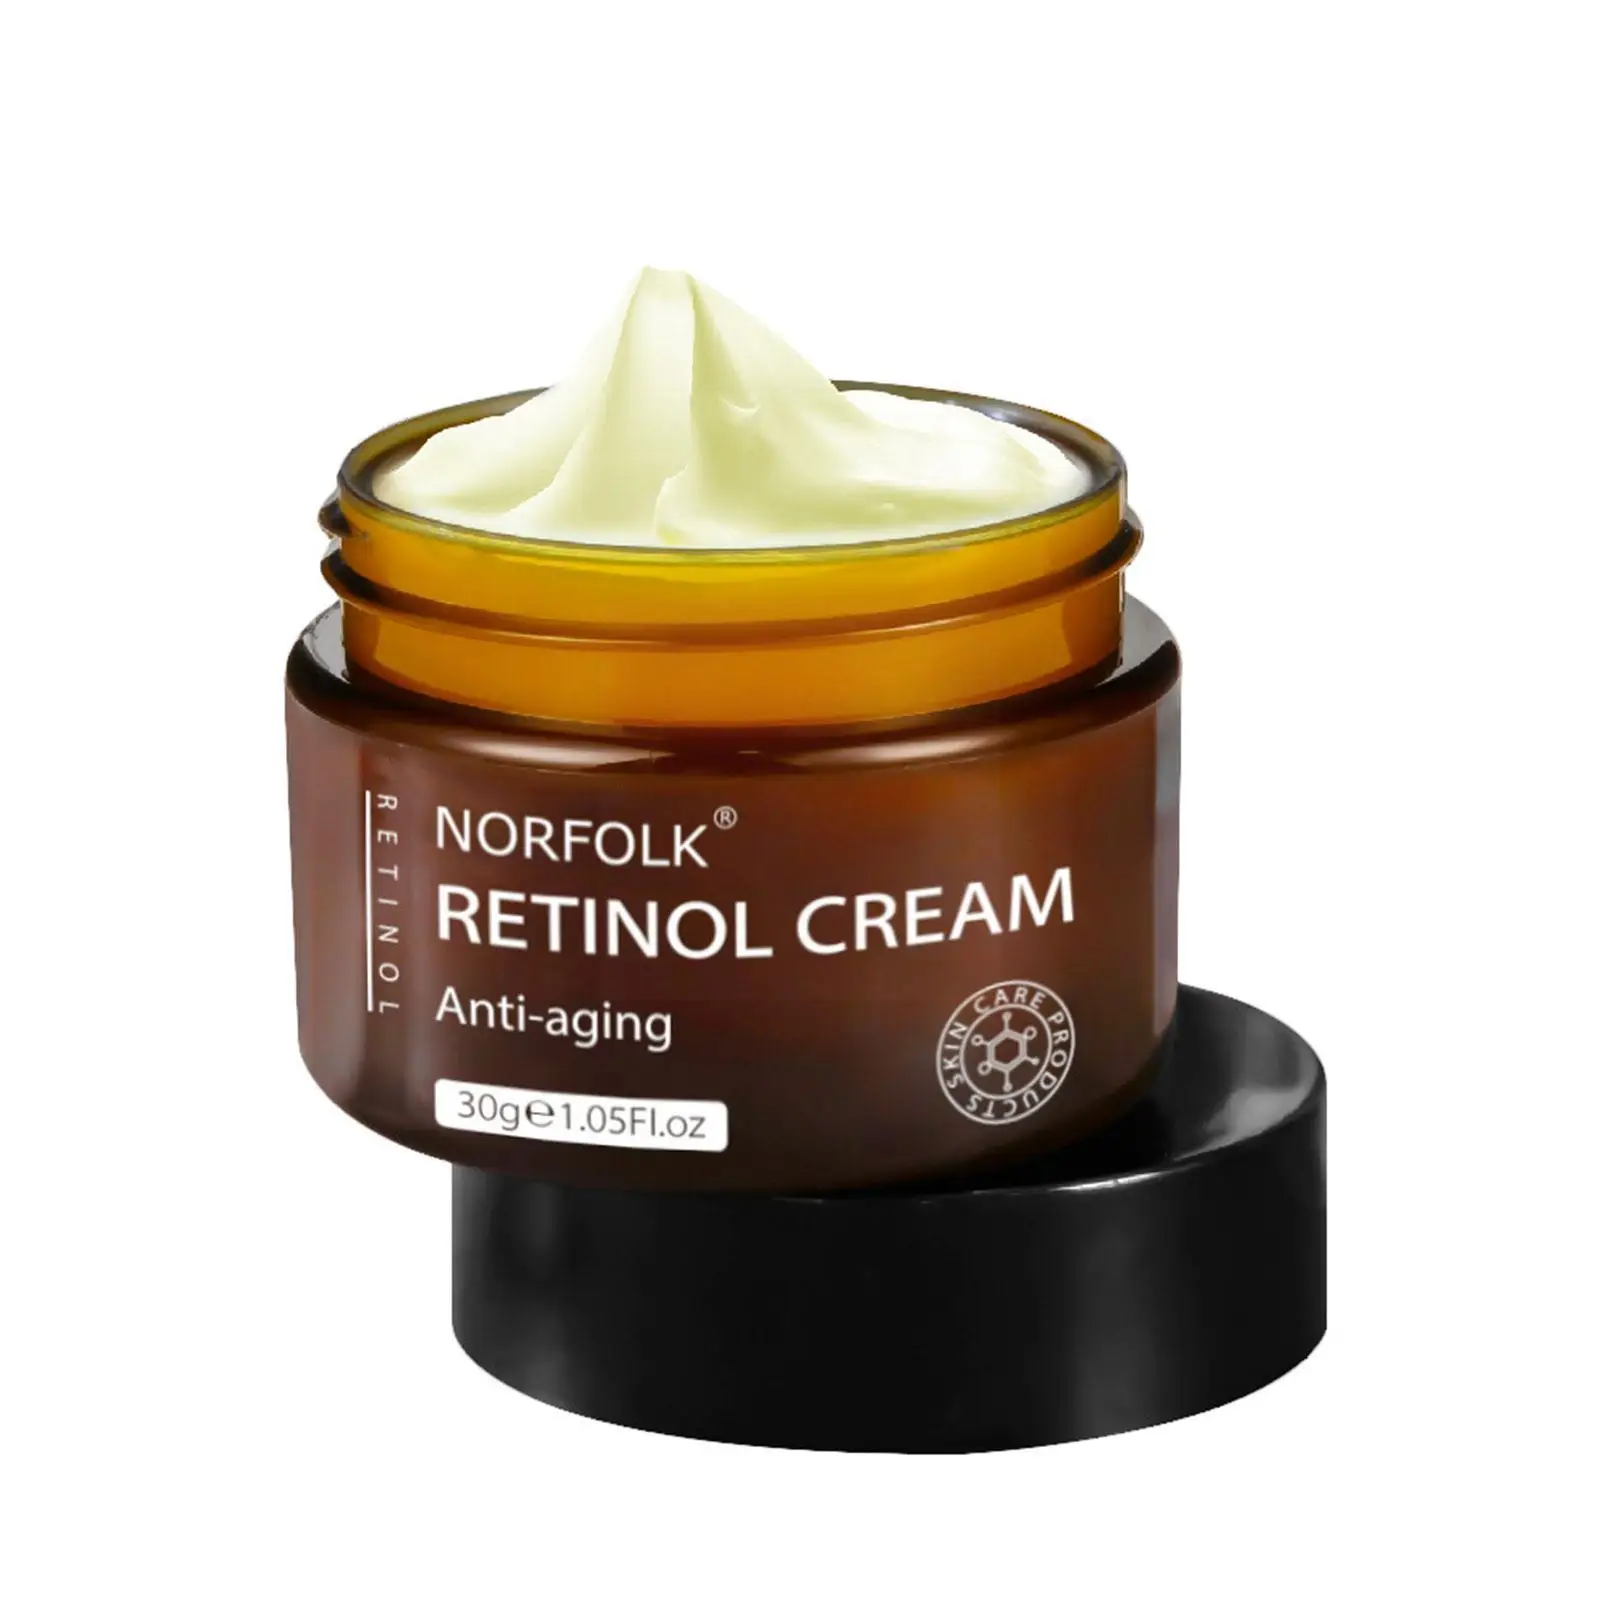 30g Retinol Anti-wrinkle Face Cream Firming Lifting Remove Line Fine Care Repair Wrinkles Aging Nourish Fade Product Skin A F3Q7